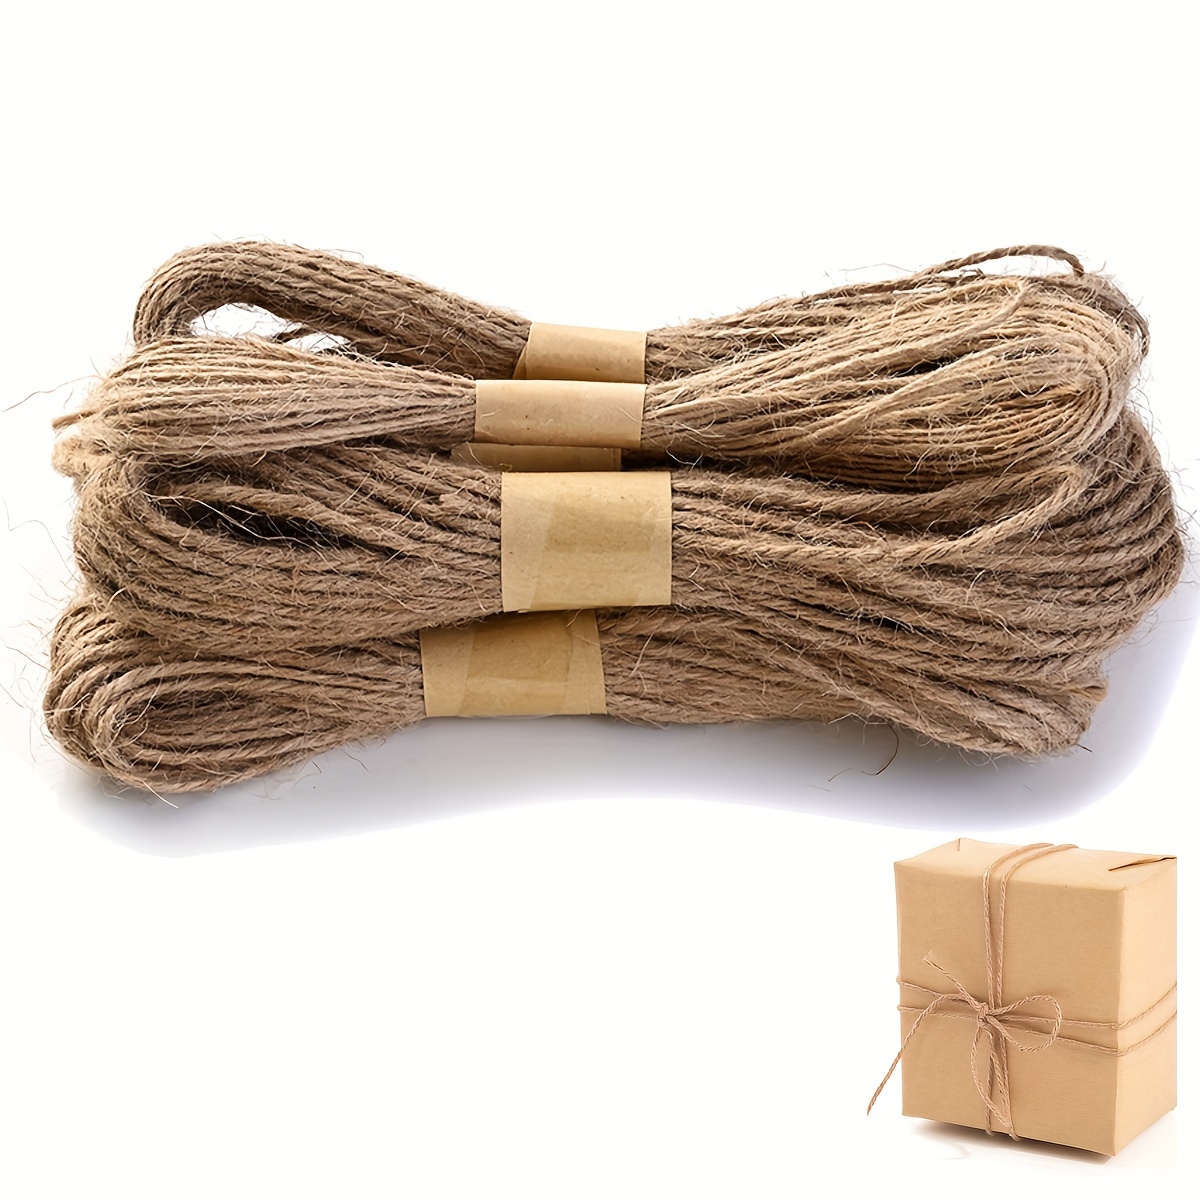 Rope Jute Rope (3/4 in x 20 ft) Natural Thick Hemp Rope for Crafts,Hammock  USA.